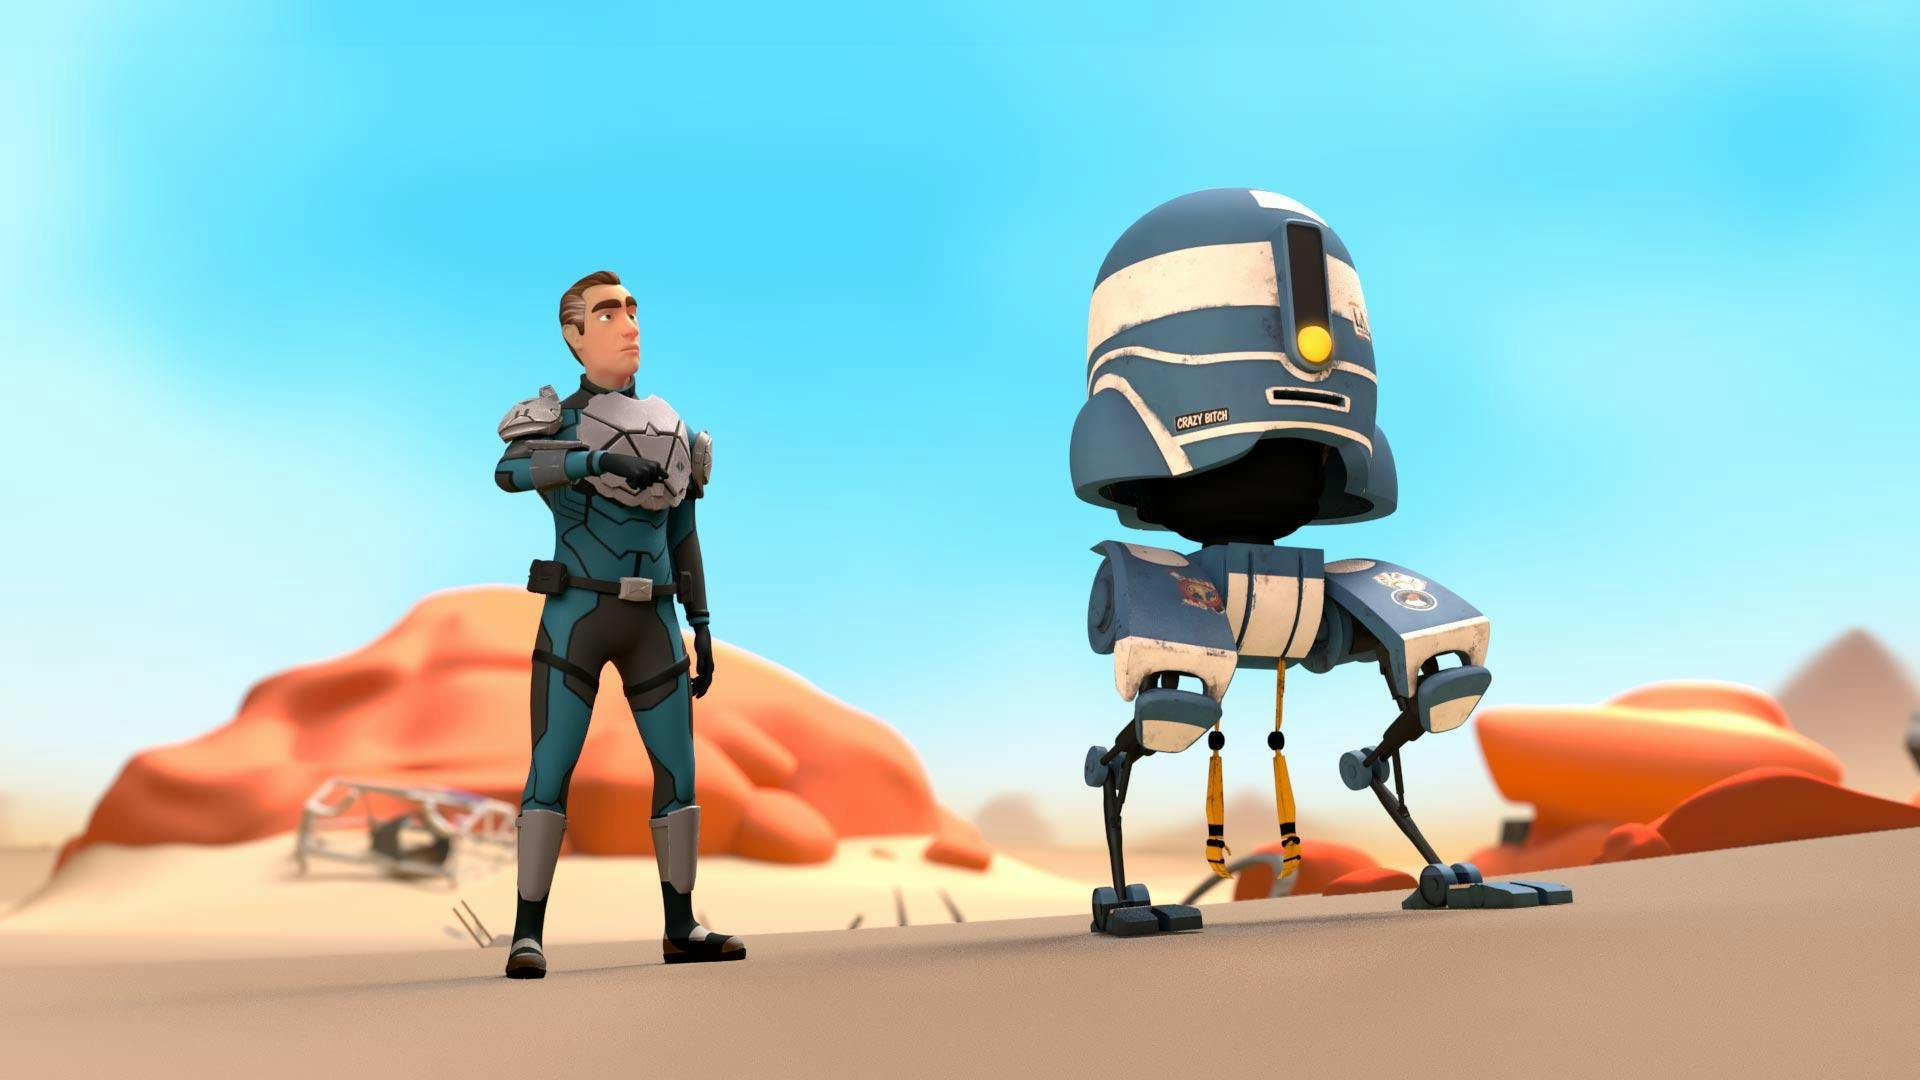 Animated character standing next to robot in a desert.